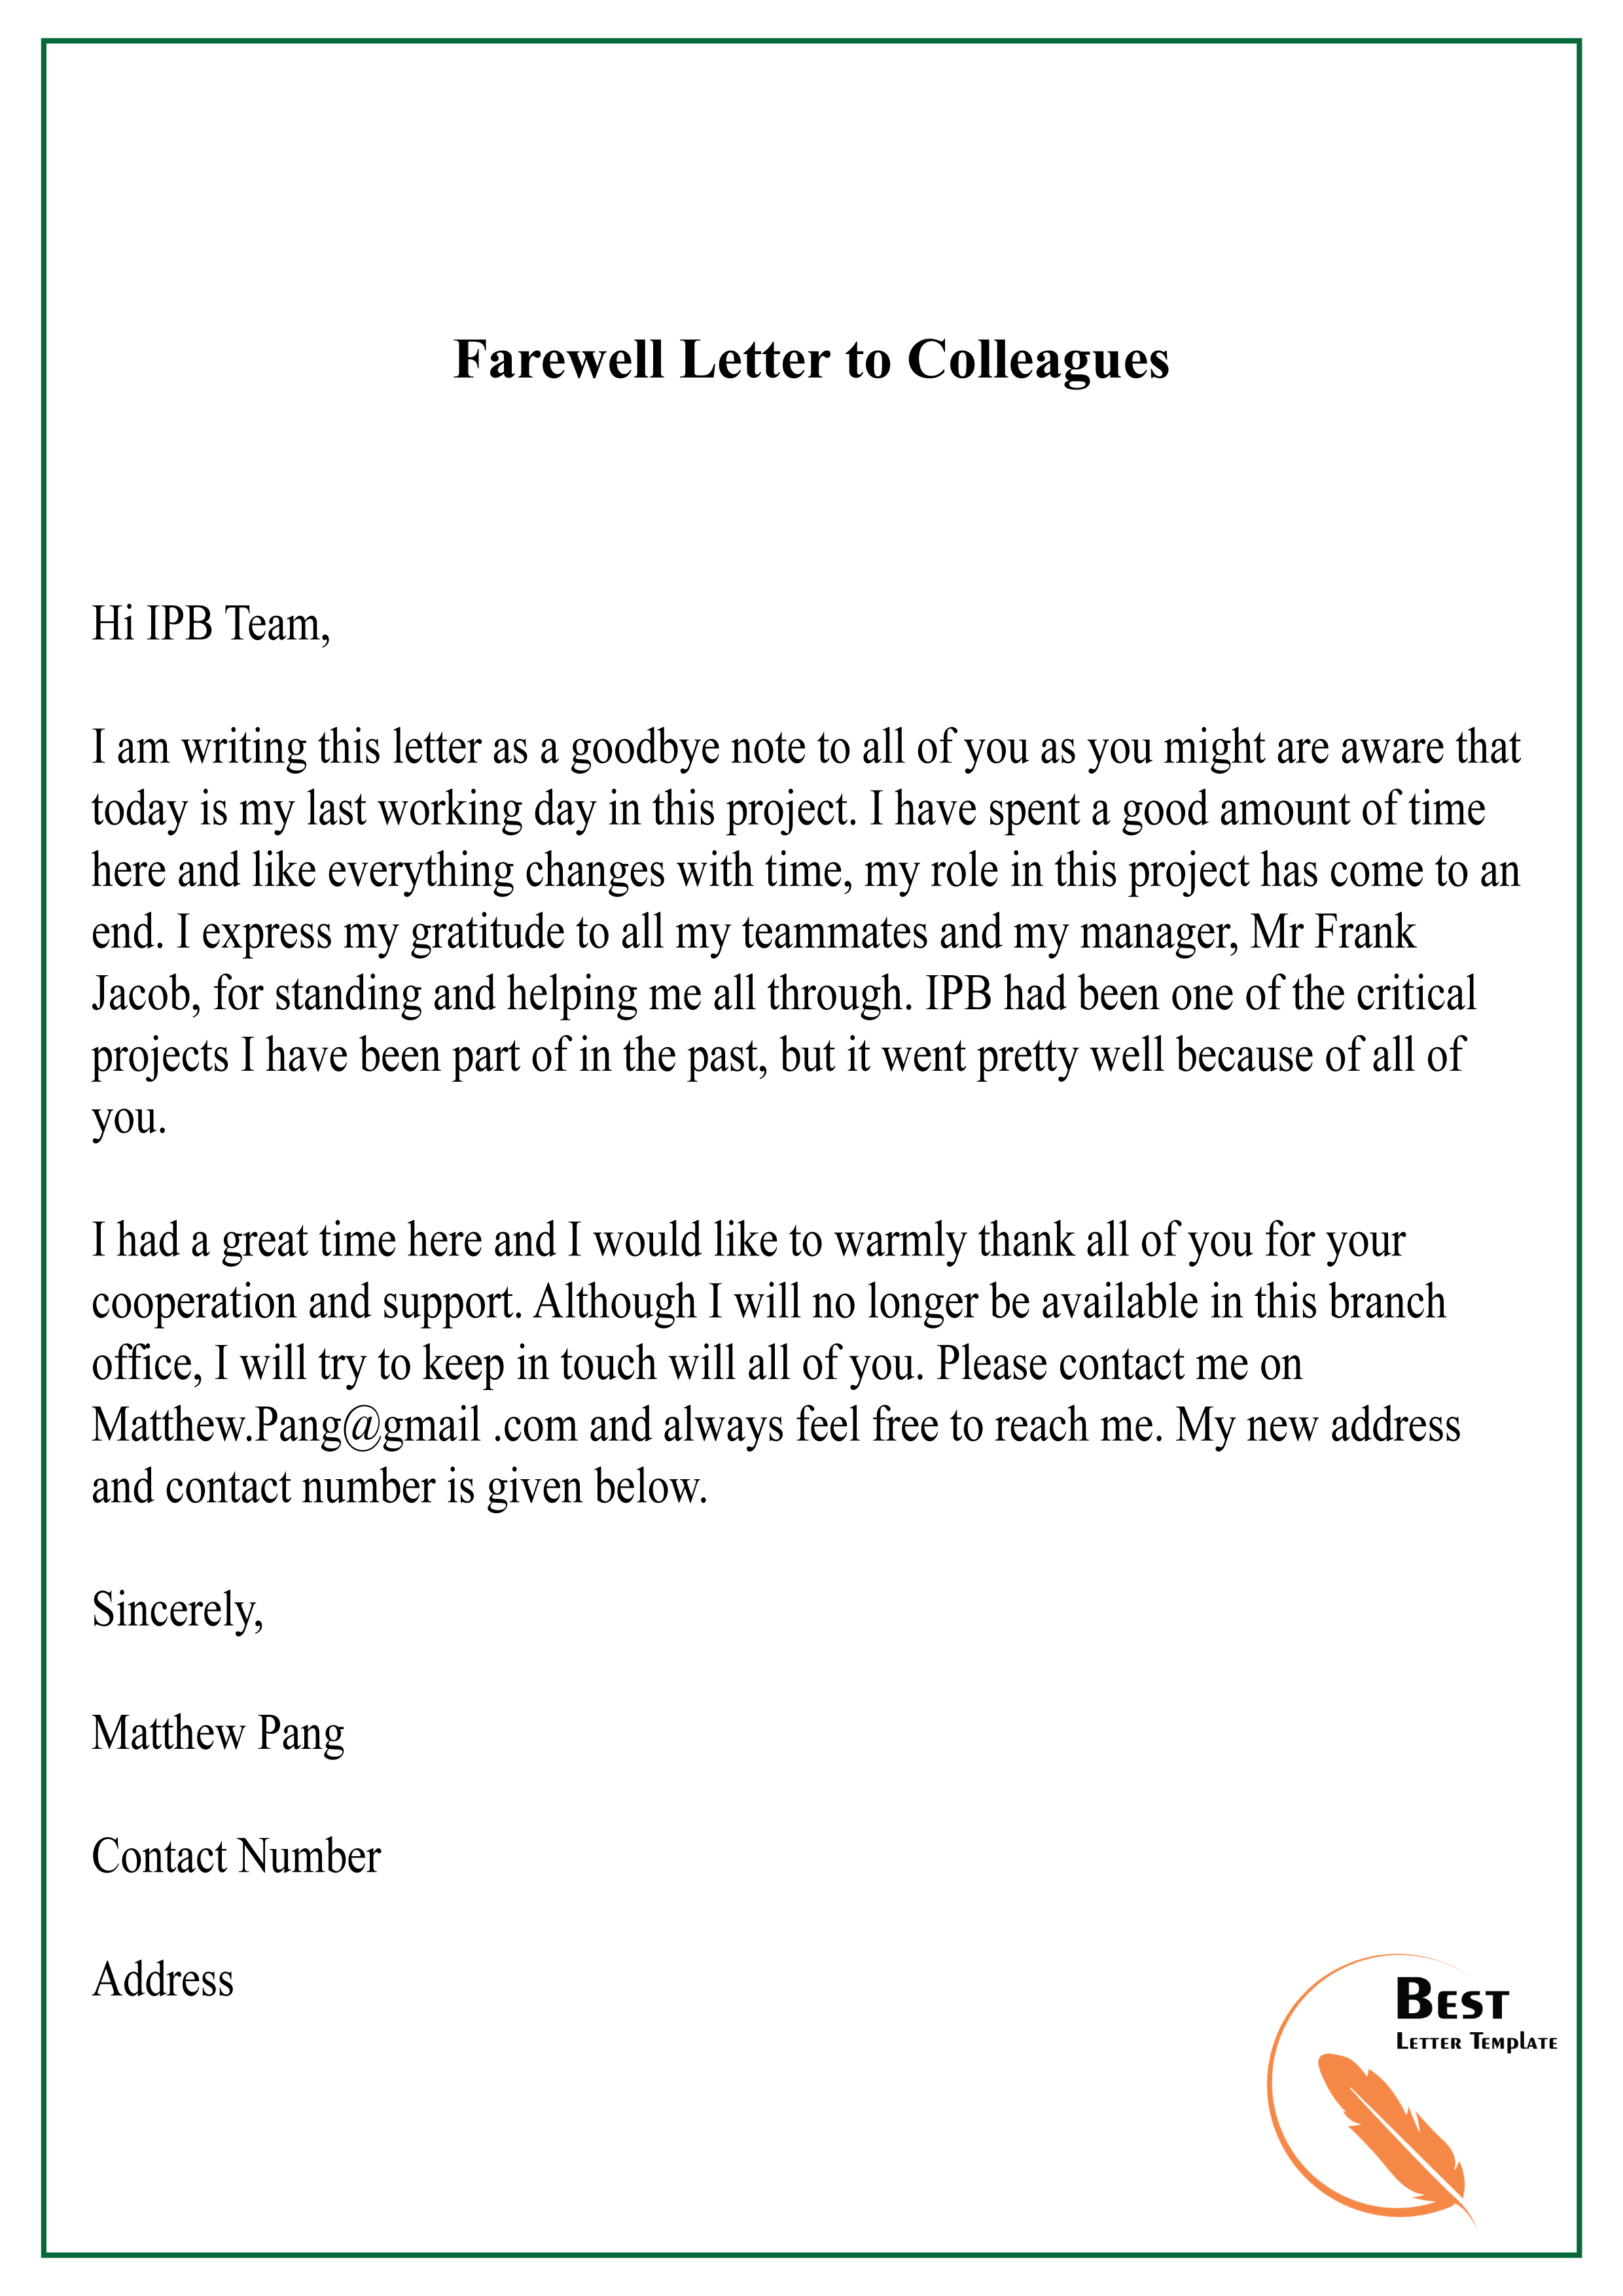 farewell-letter-to-colleagues-01-best-letter-template